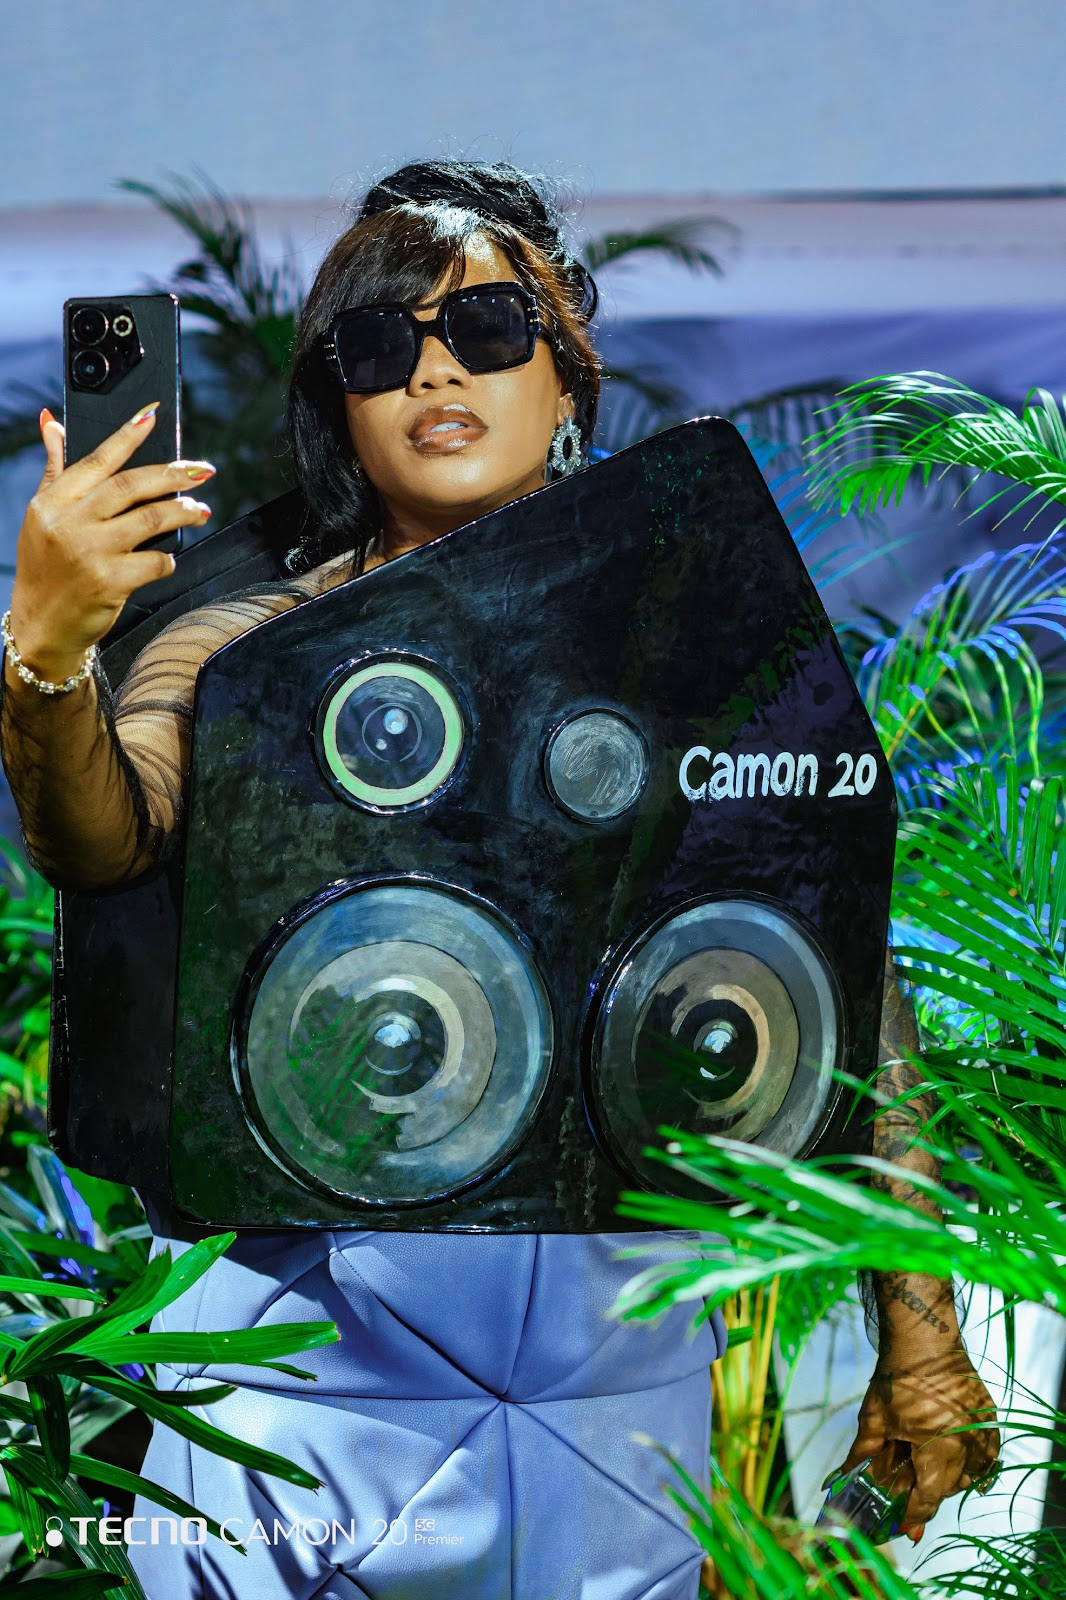 Stars From The Blue Carpet of The Camon 20 Launch Wow The Fashion and Tech World